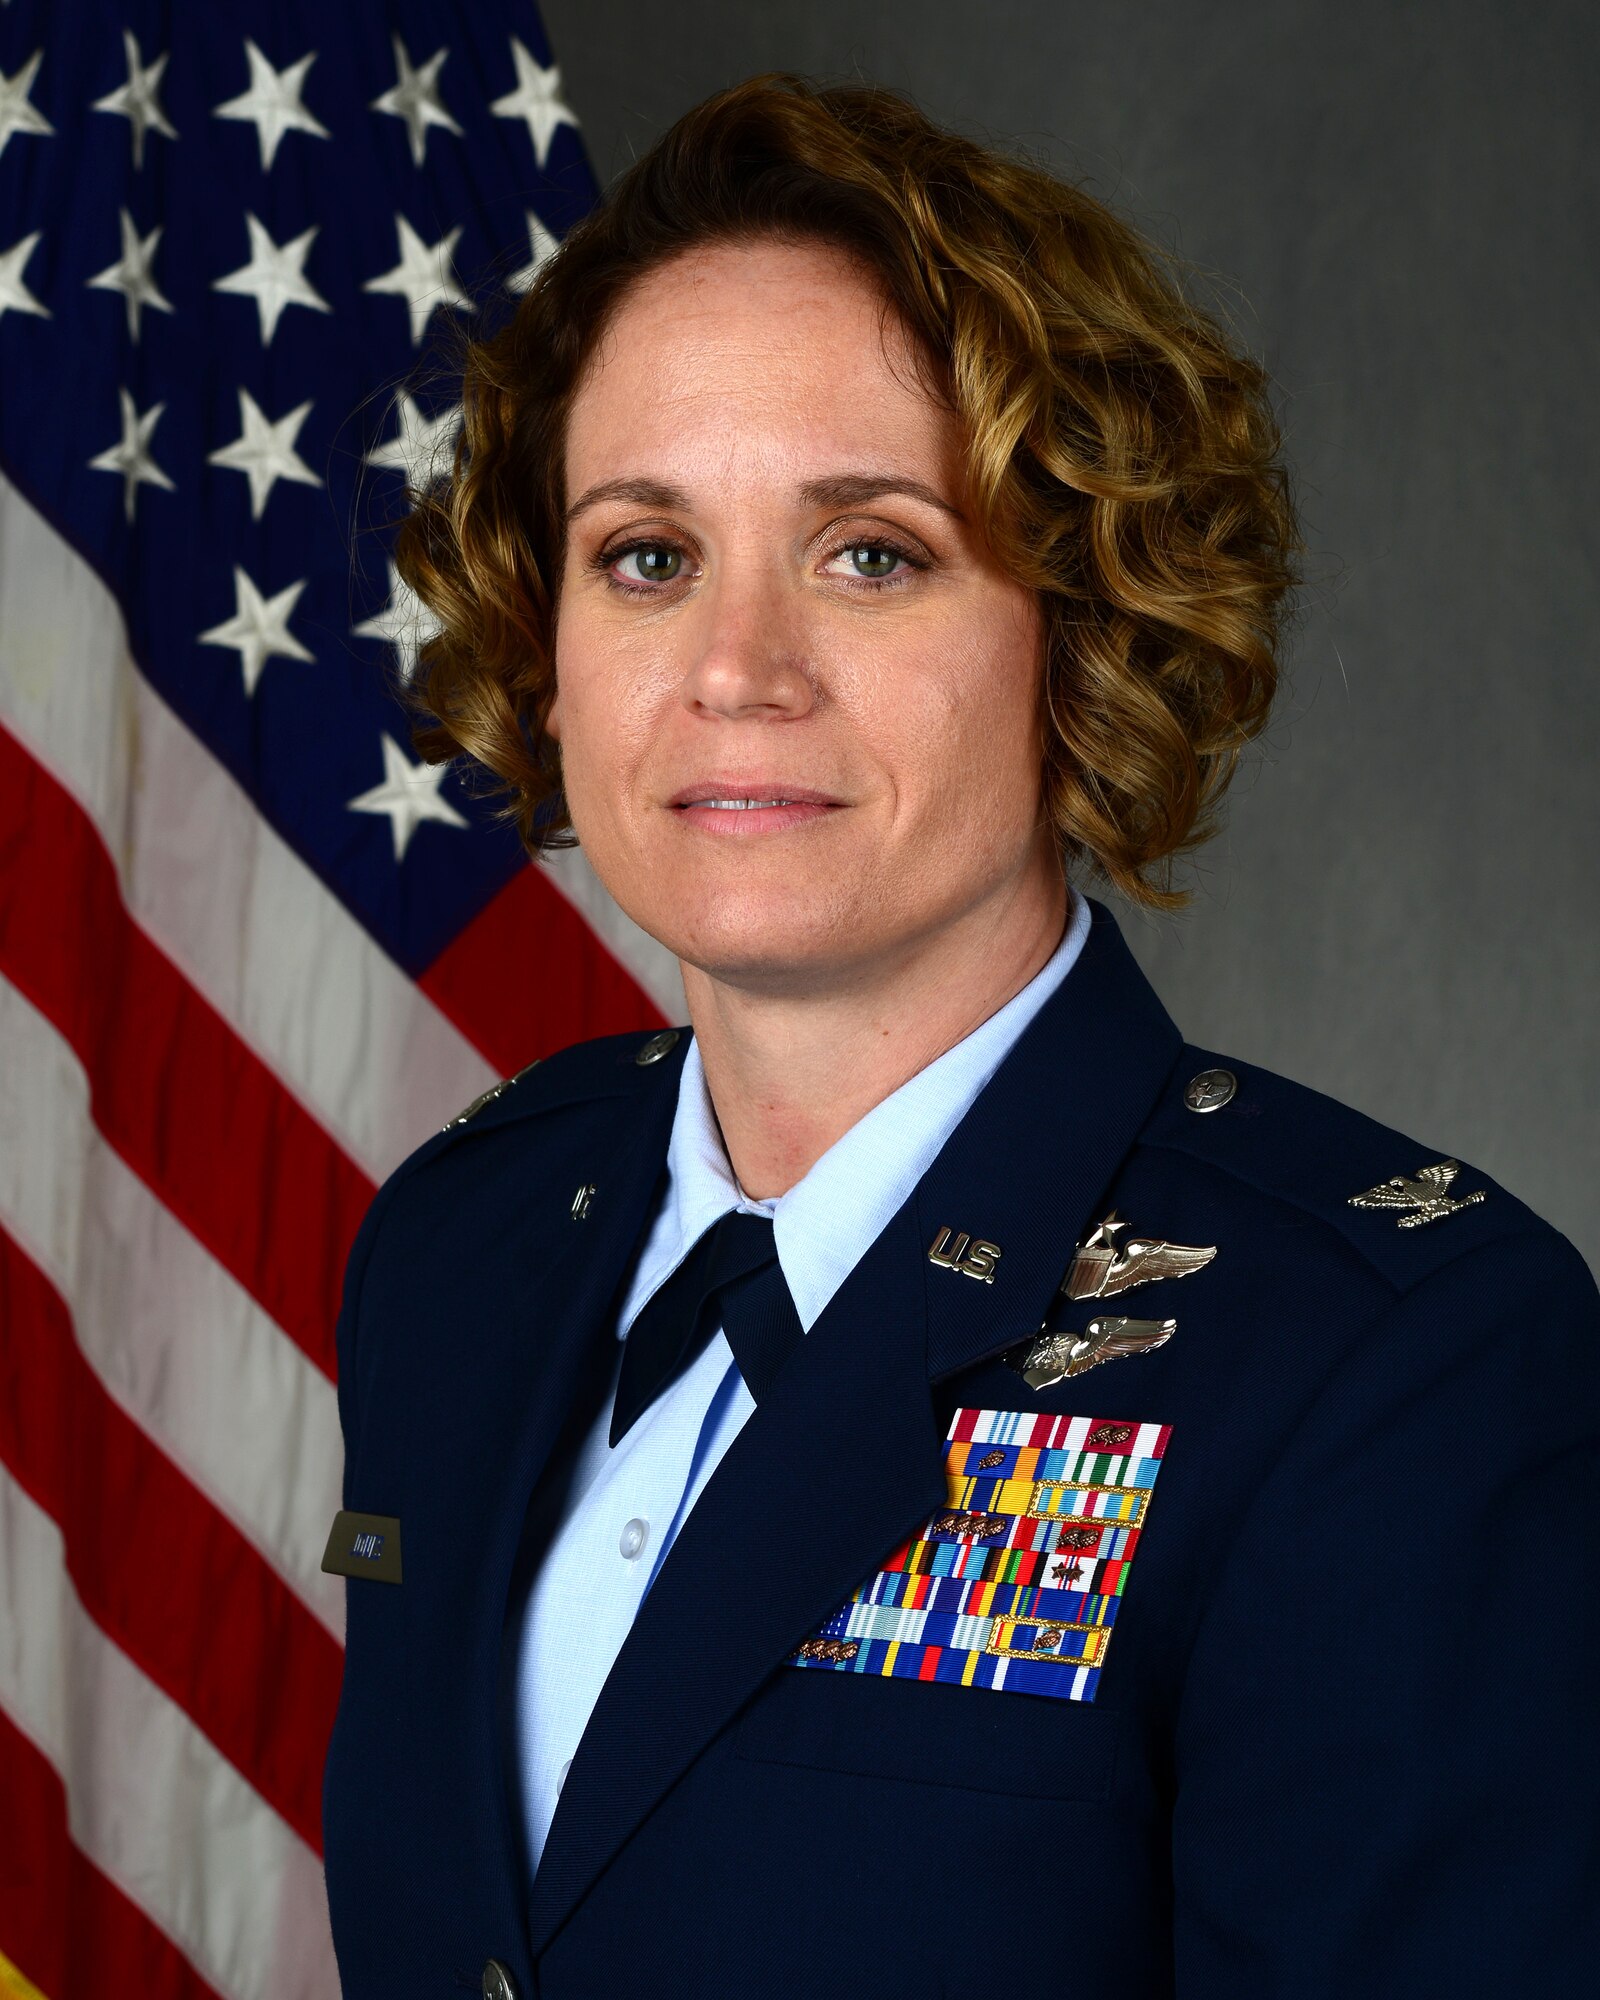 Col. Carey Jones, 47th Operations Group commander, shares her thoughts on connection throughout a unit and key takeaways that lead to unit success. "The key to mitigating this pitfall is shifting our mindset outward," said Jones. "Take a moment to consider the needs of others, their challenges, objectives and focus on collective results." (U.S. Air Force photo by Senior Airman Anne McCready)